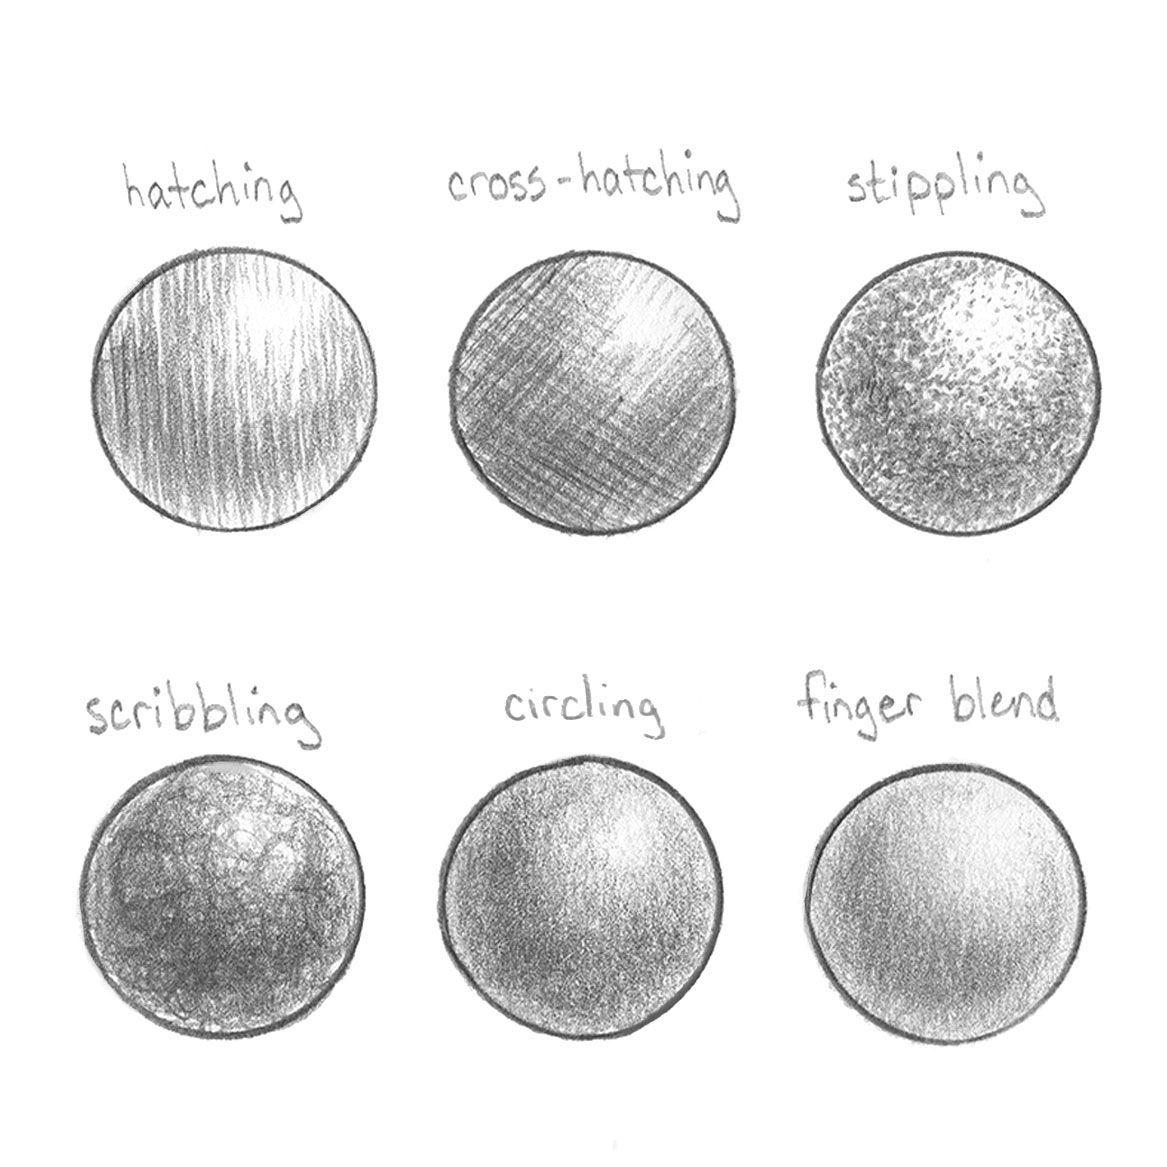 7207) Pencil Drawing : Techniques of Shading Basic Shapes - YouTube | Pencil  drawings for beginners, Basic shapes, Pencil drawing tutorials